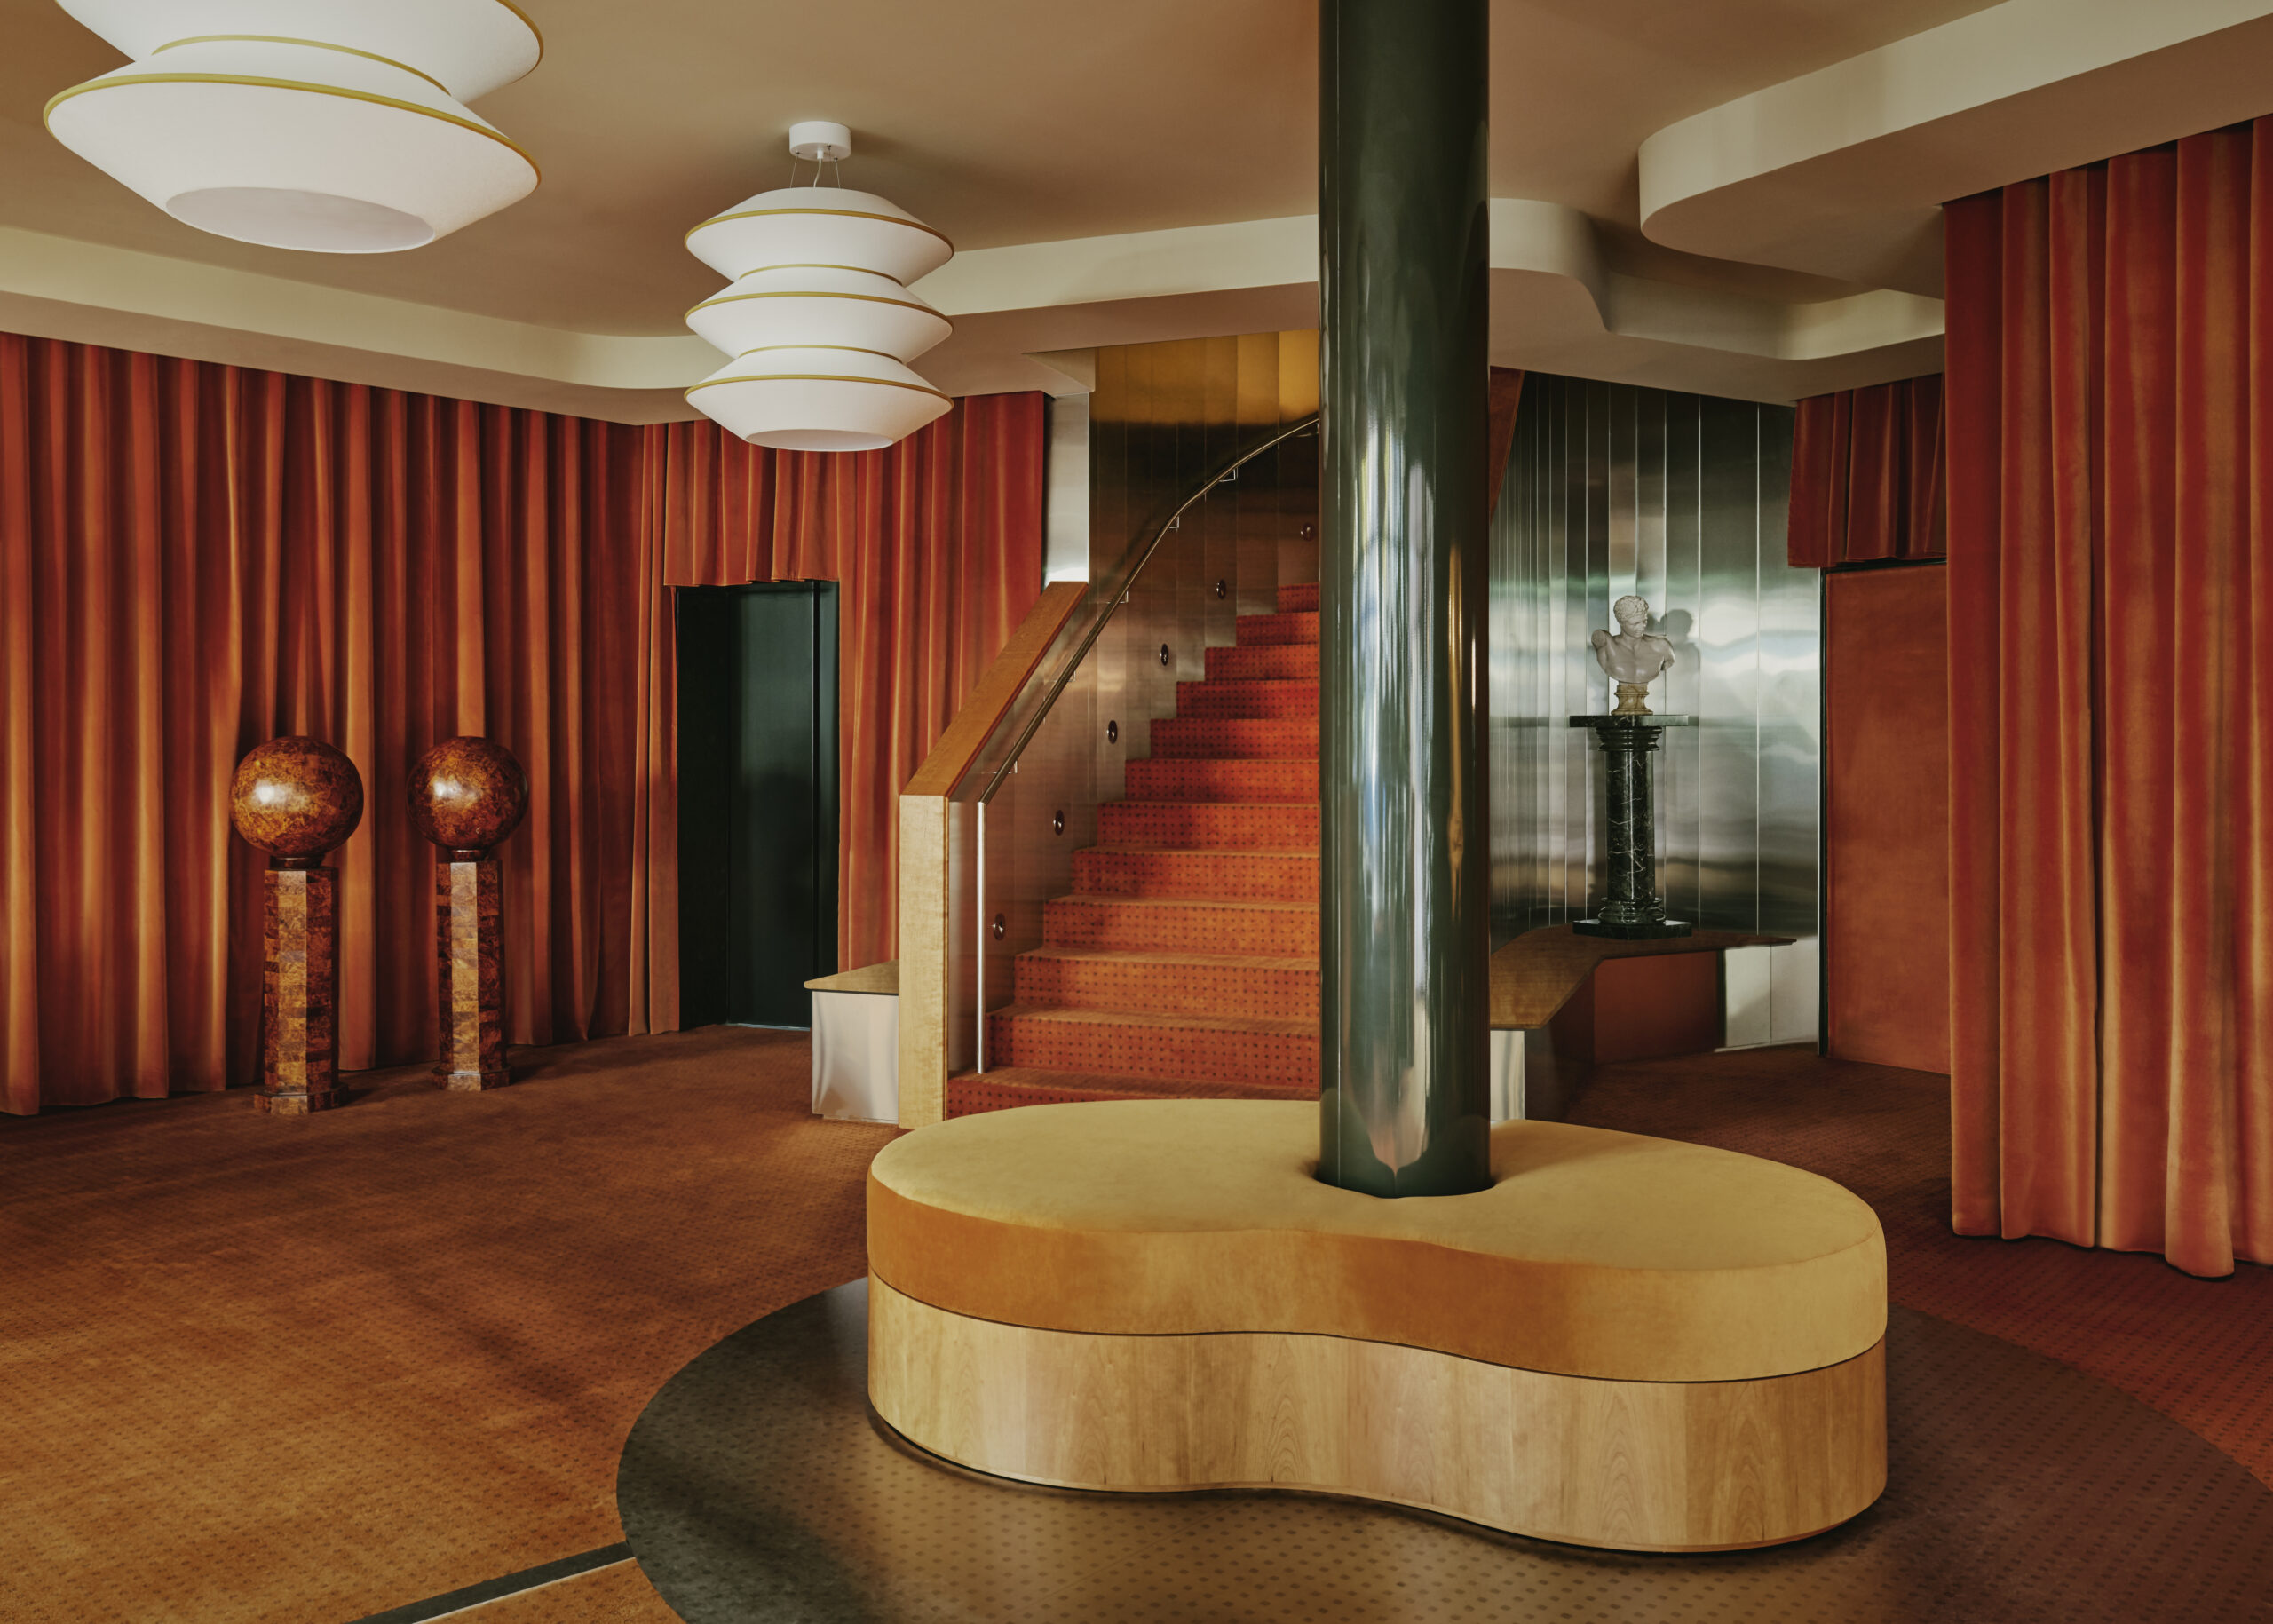 Locke opens its first Swiss aparthotel with interiors designed by Sella